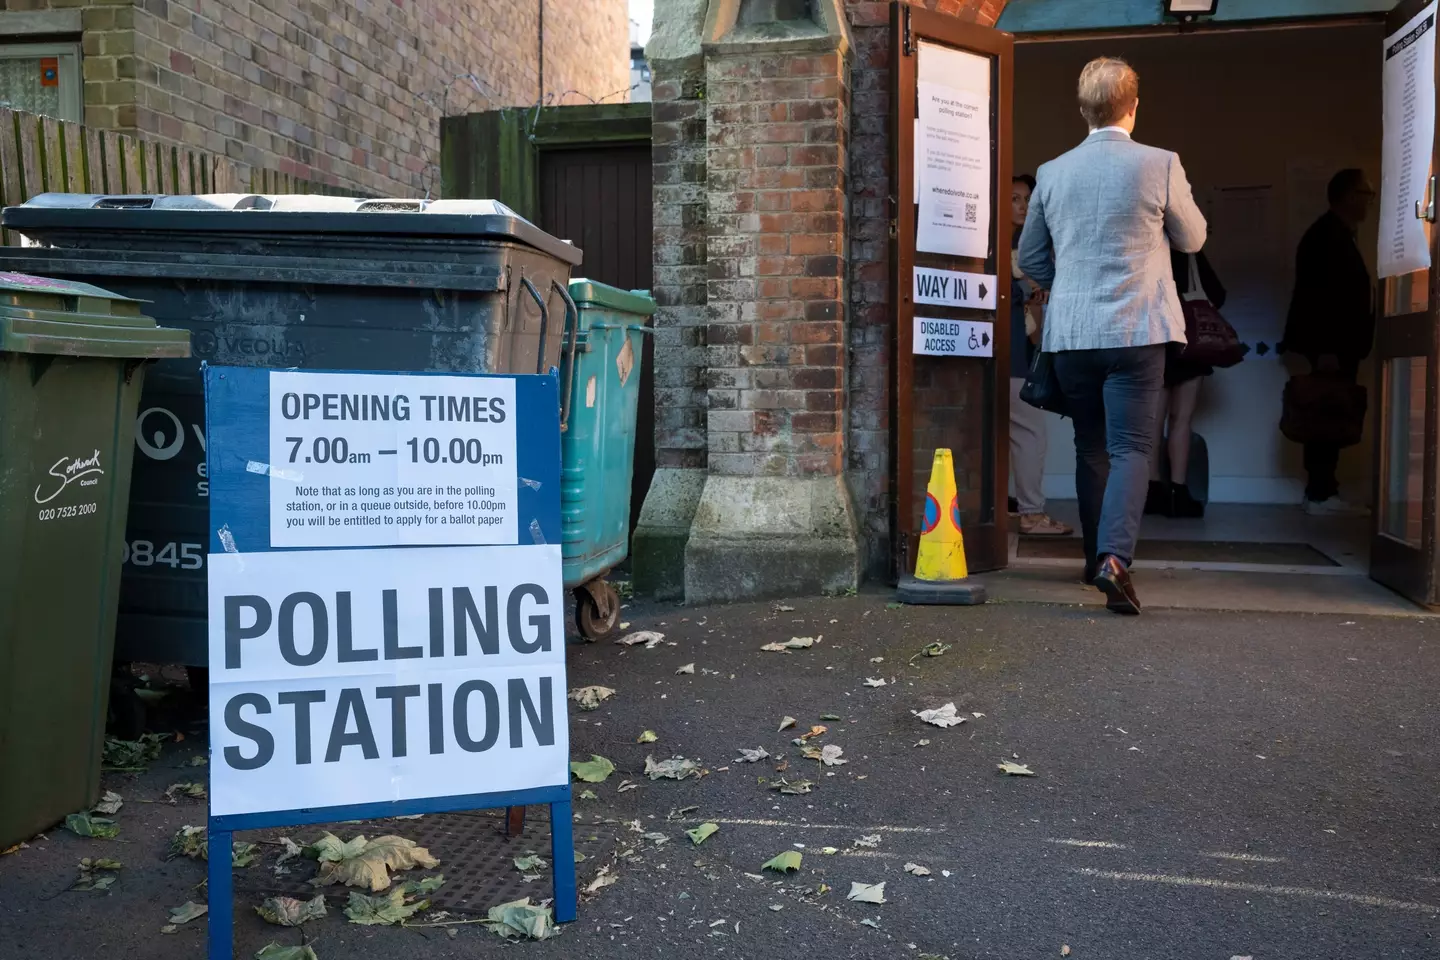 Make sure you use your vote lads. (Richard Baker / In Pictures via Getty Images)